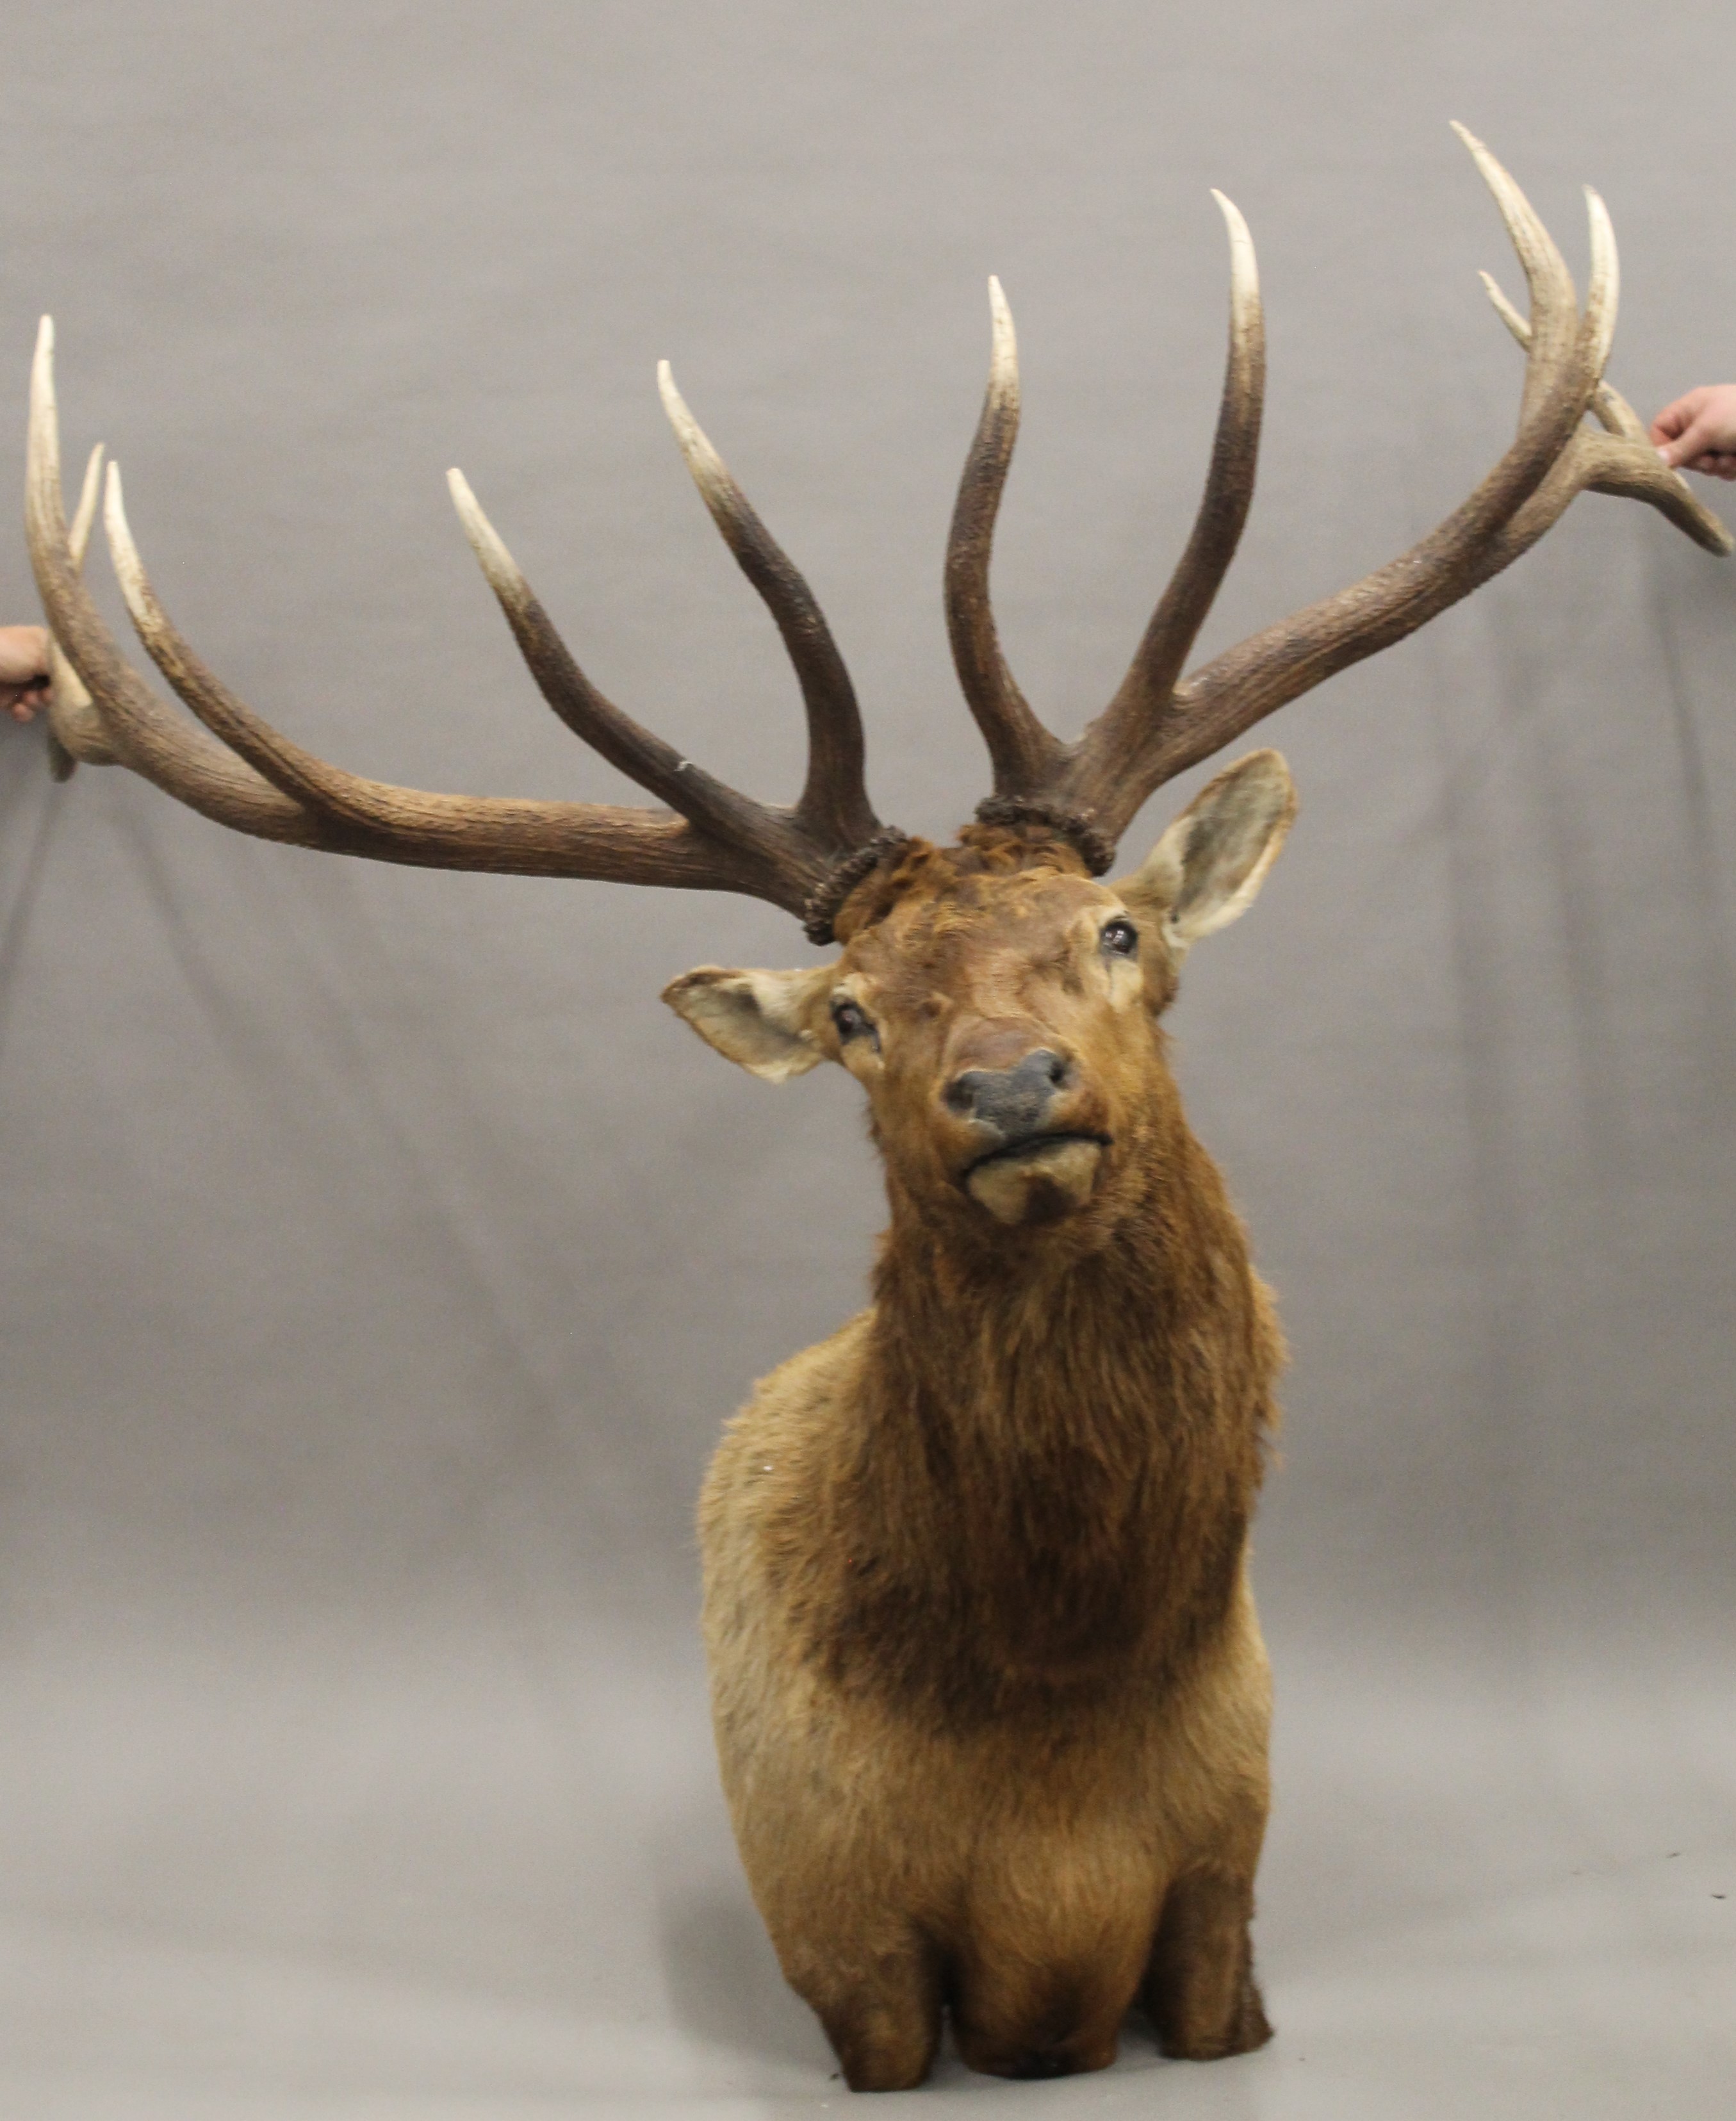 A preserved taxidermy specimen of an Elk's head.